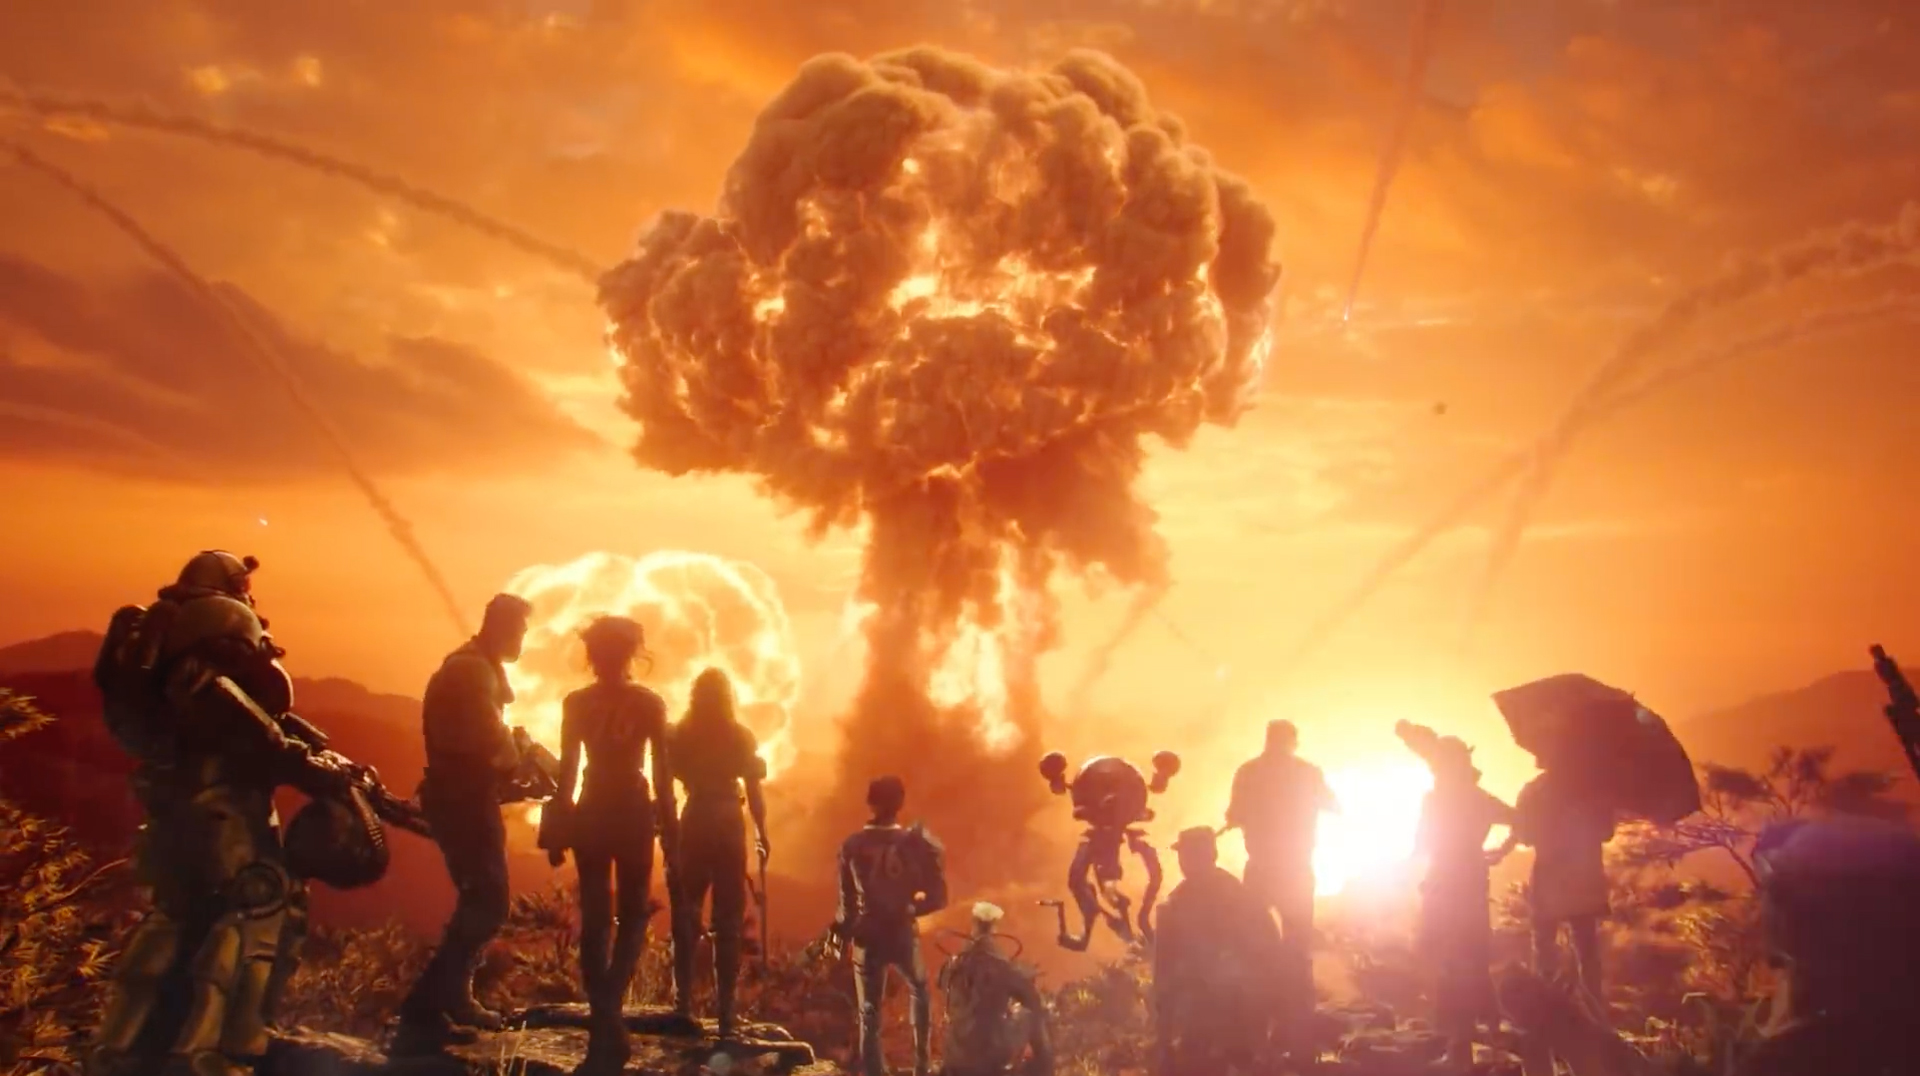 FALLOUT 76 Live Action Trailer The Art of VFX